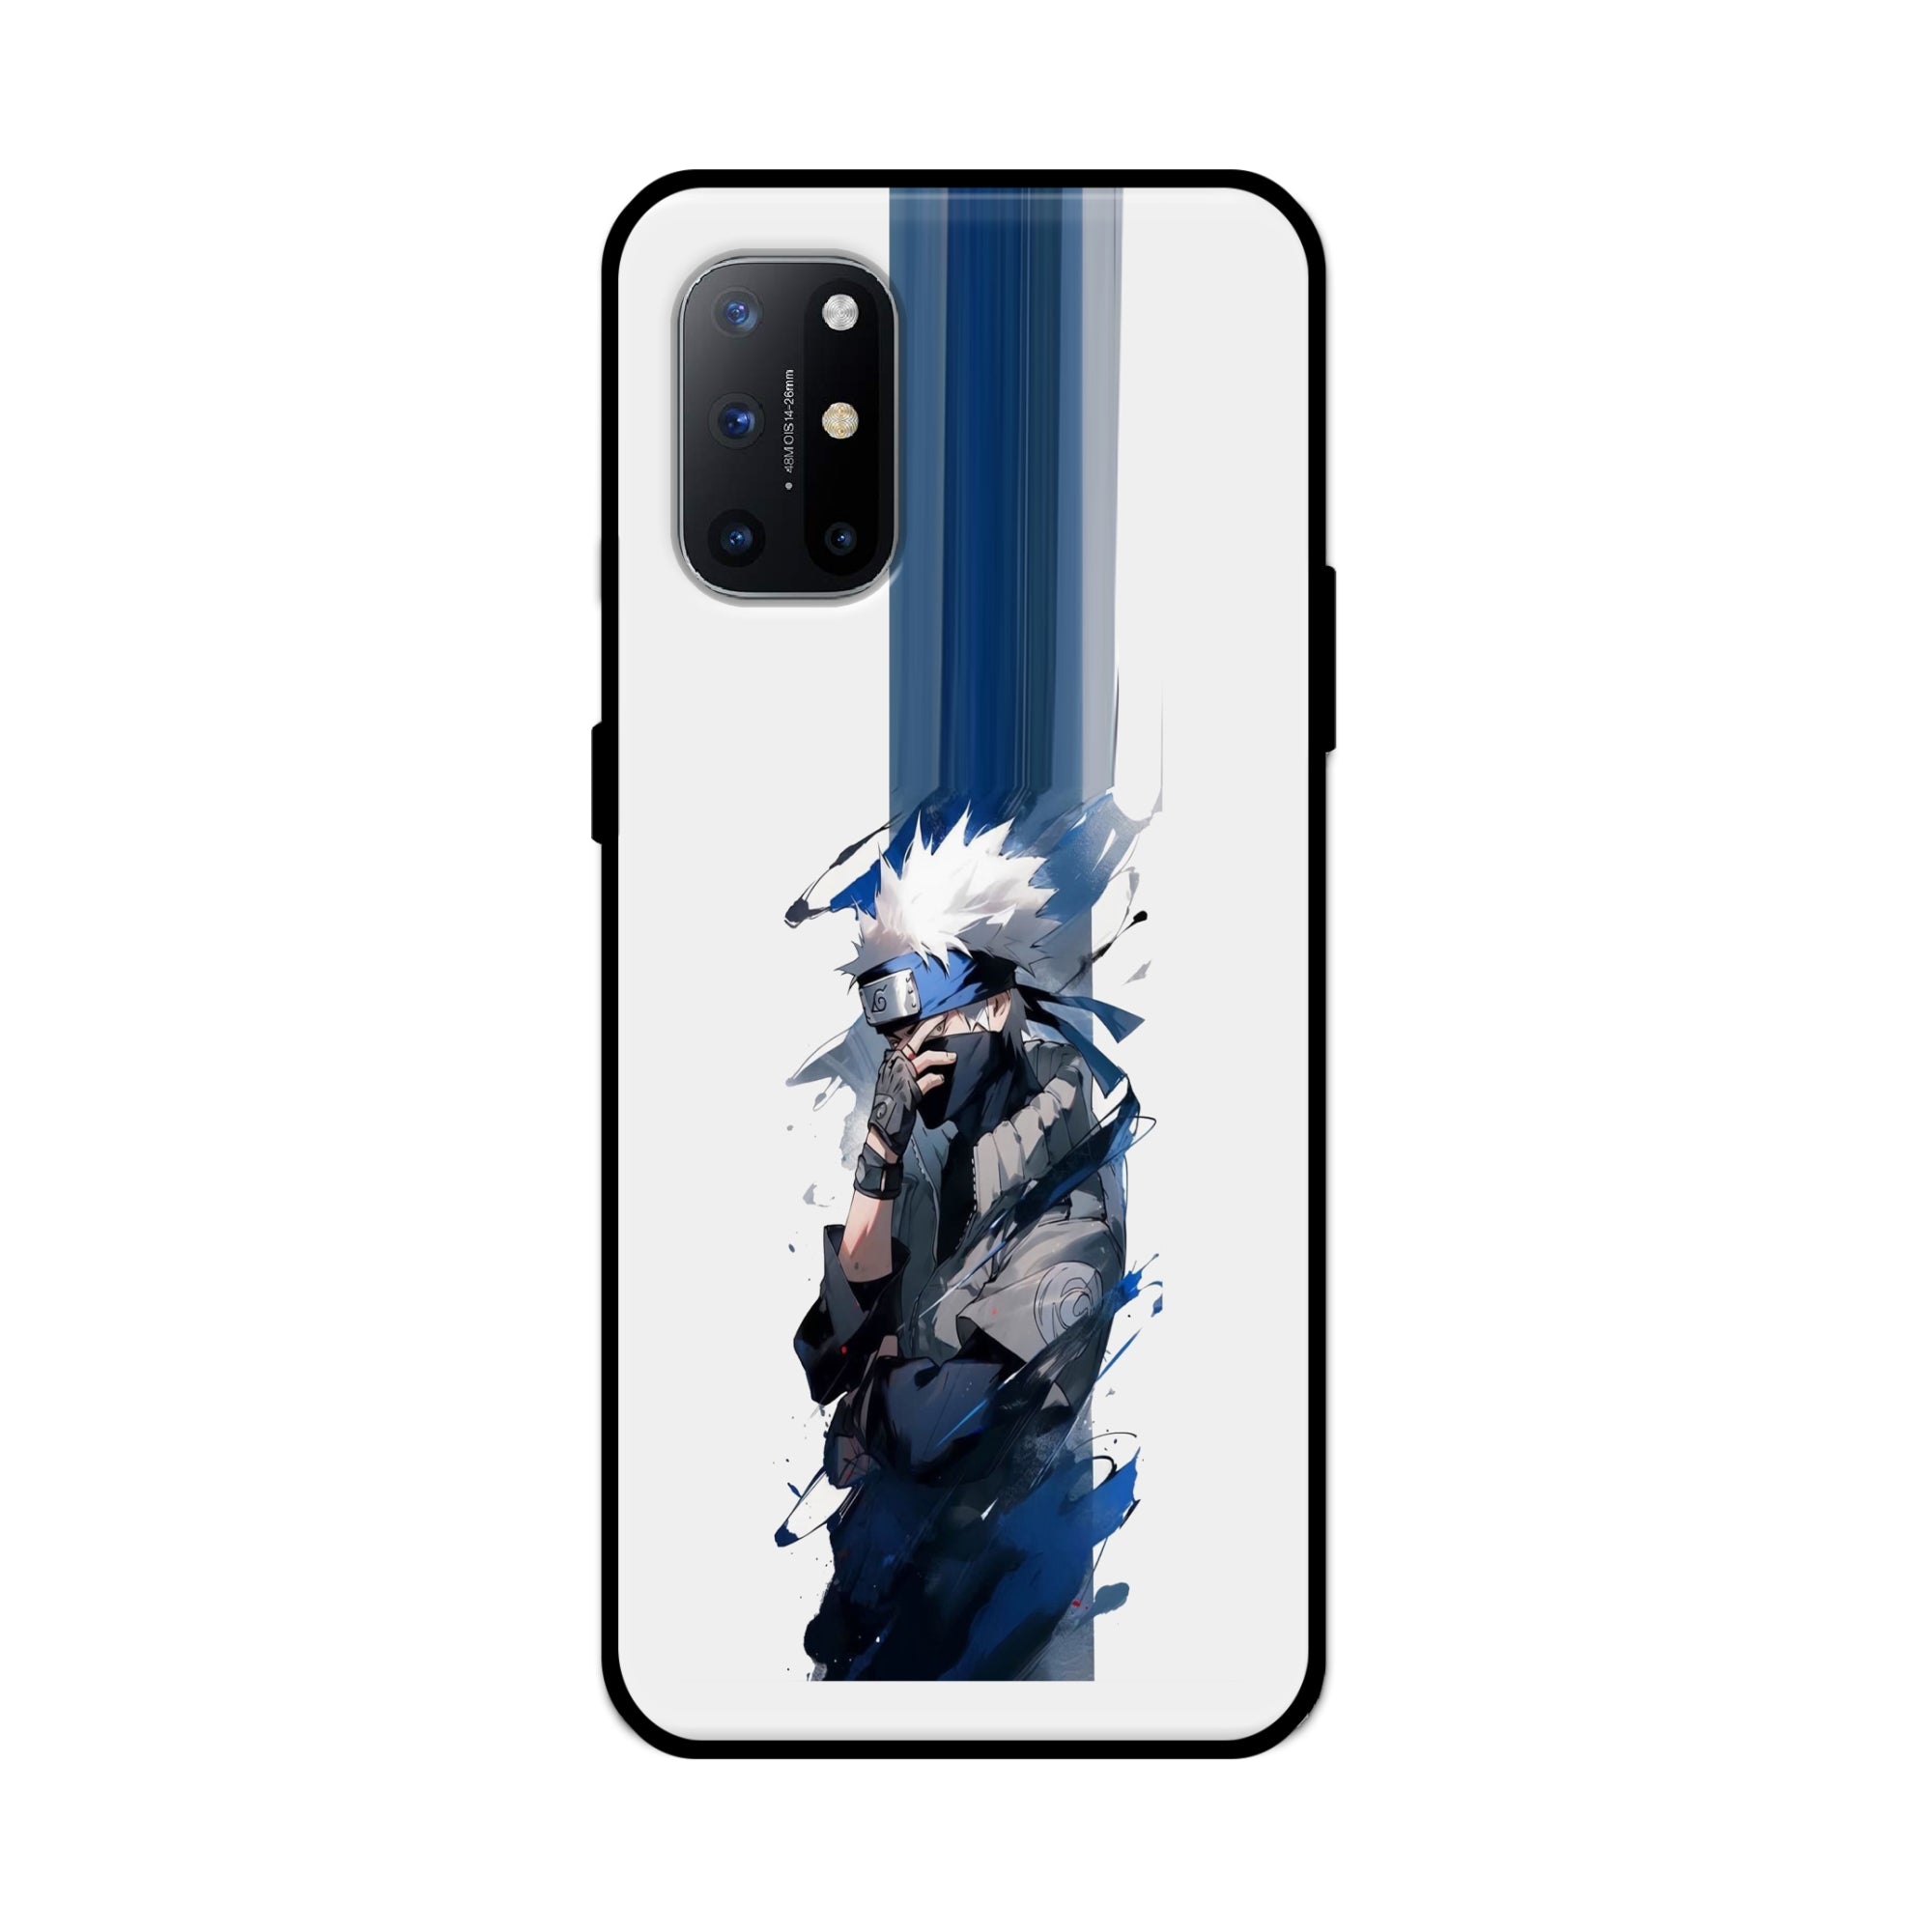 Buy Kakachi Metal-Silicon Back Mobile Phone Case/Cover For Oneplus 9R / 8T Online